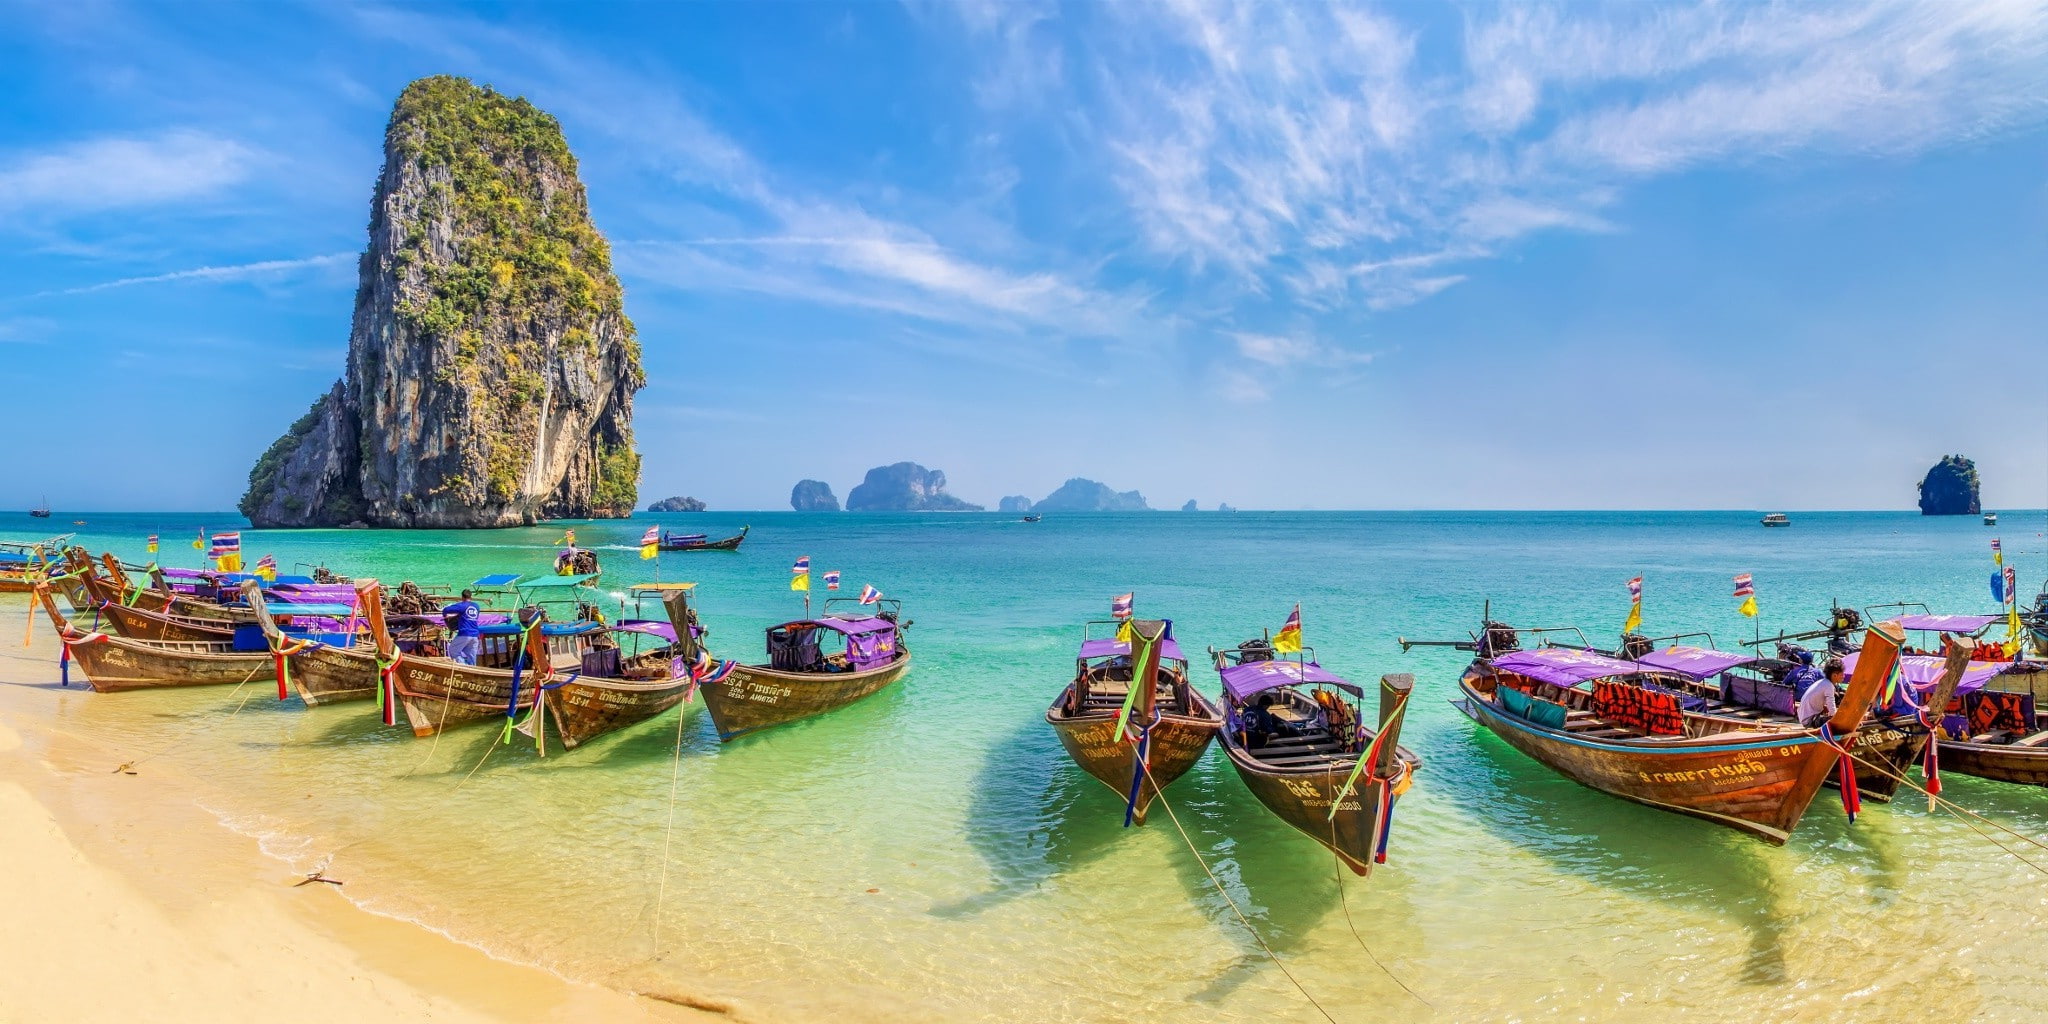 beach sand boat limestone island sea turquoise water tropical vacations summer nature landscape thailand